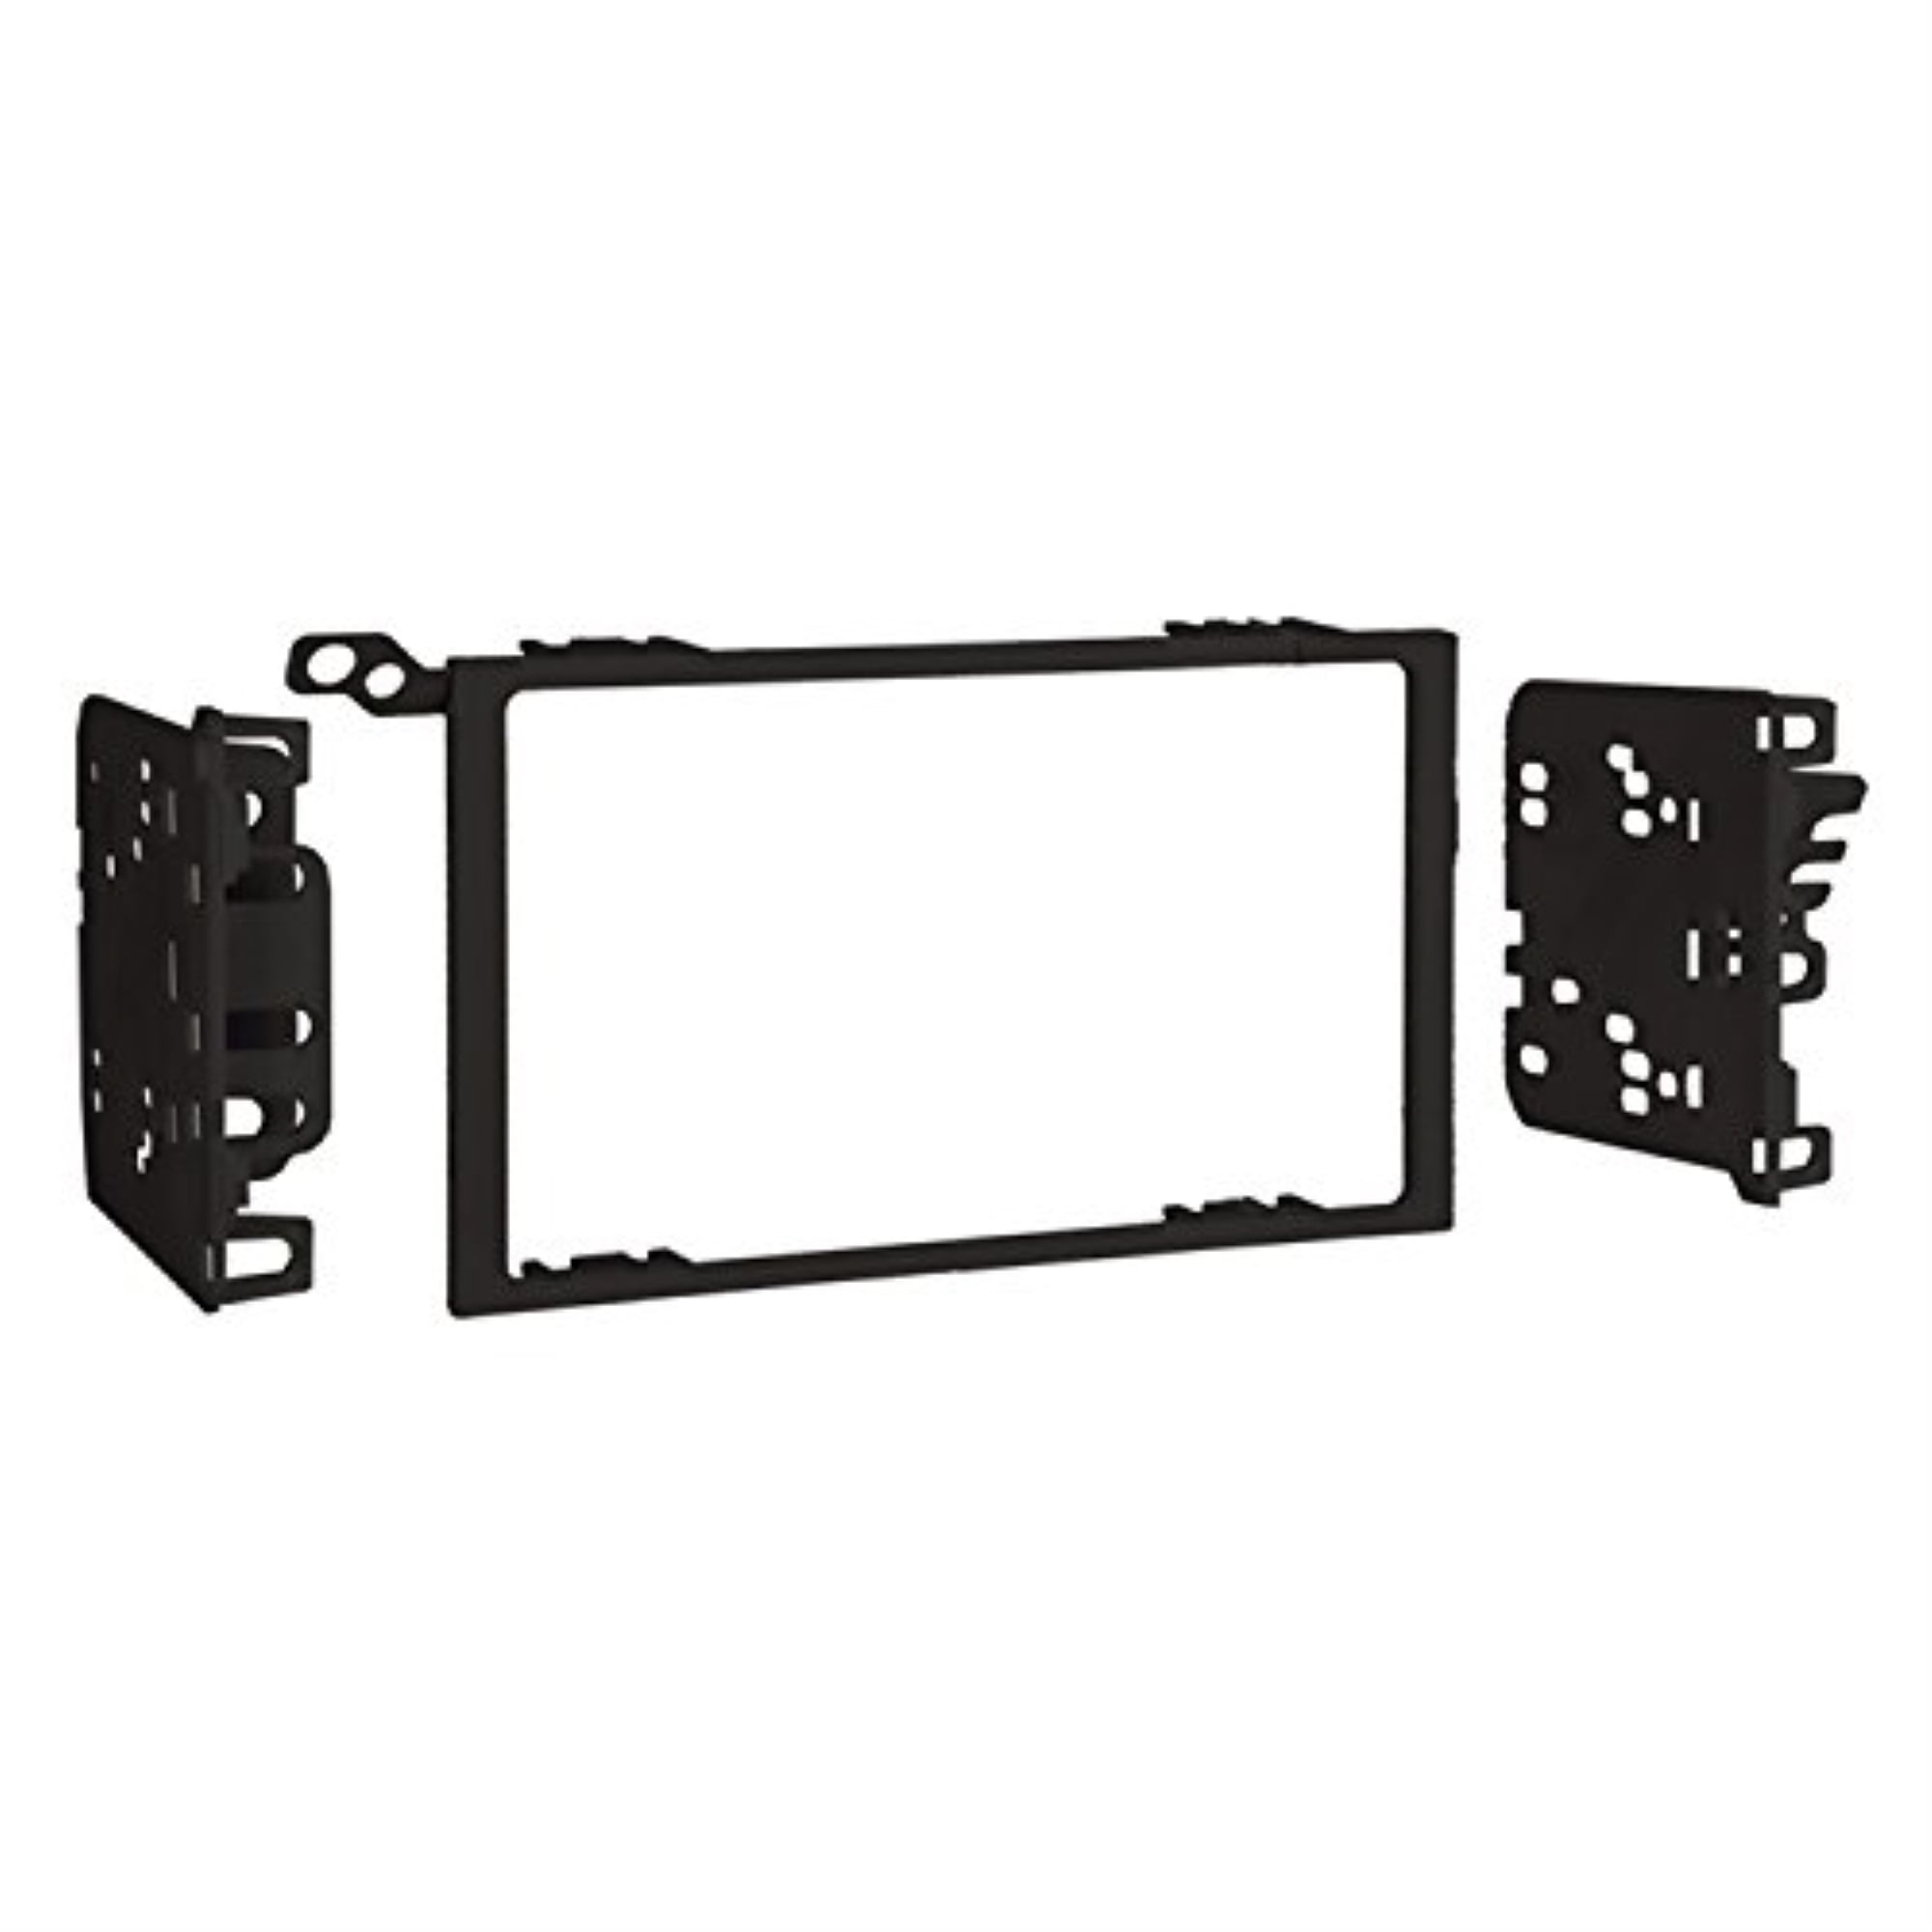 METRA 95-2001 GM DOUBLE DIN KIT FOR SELECT GM 1990-2012 